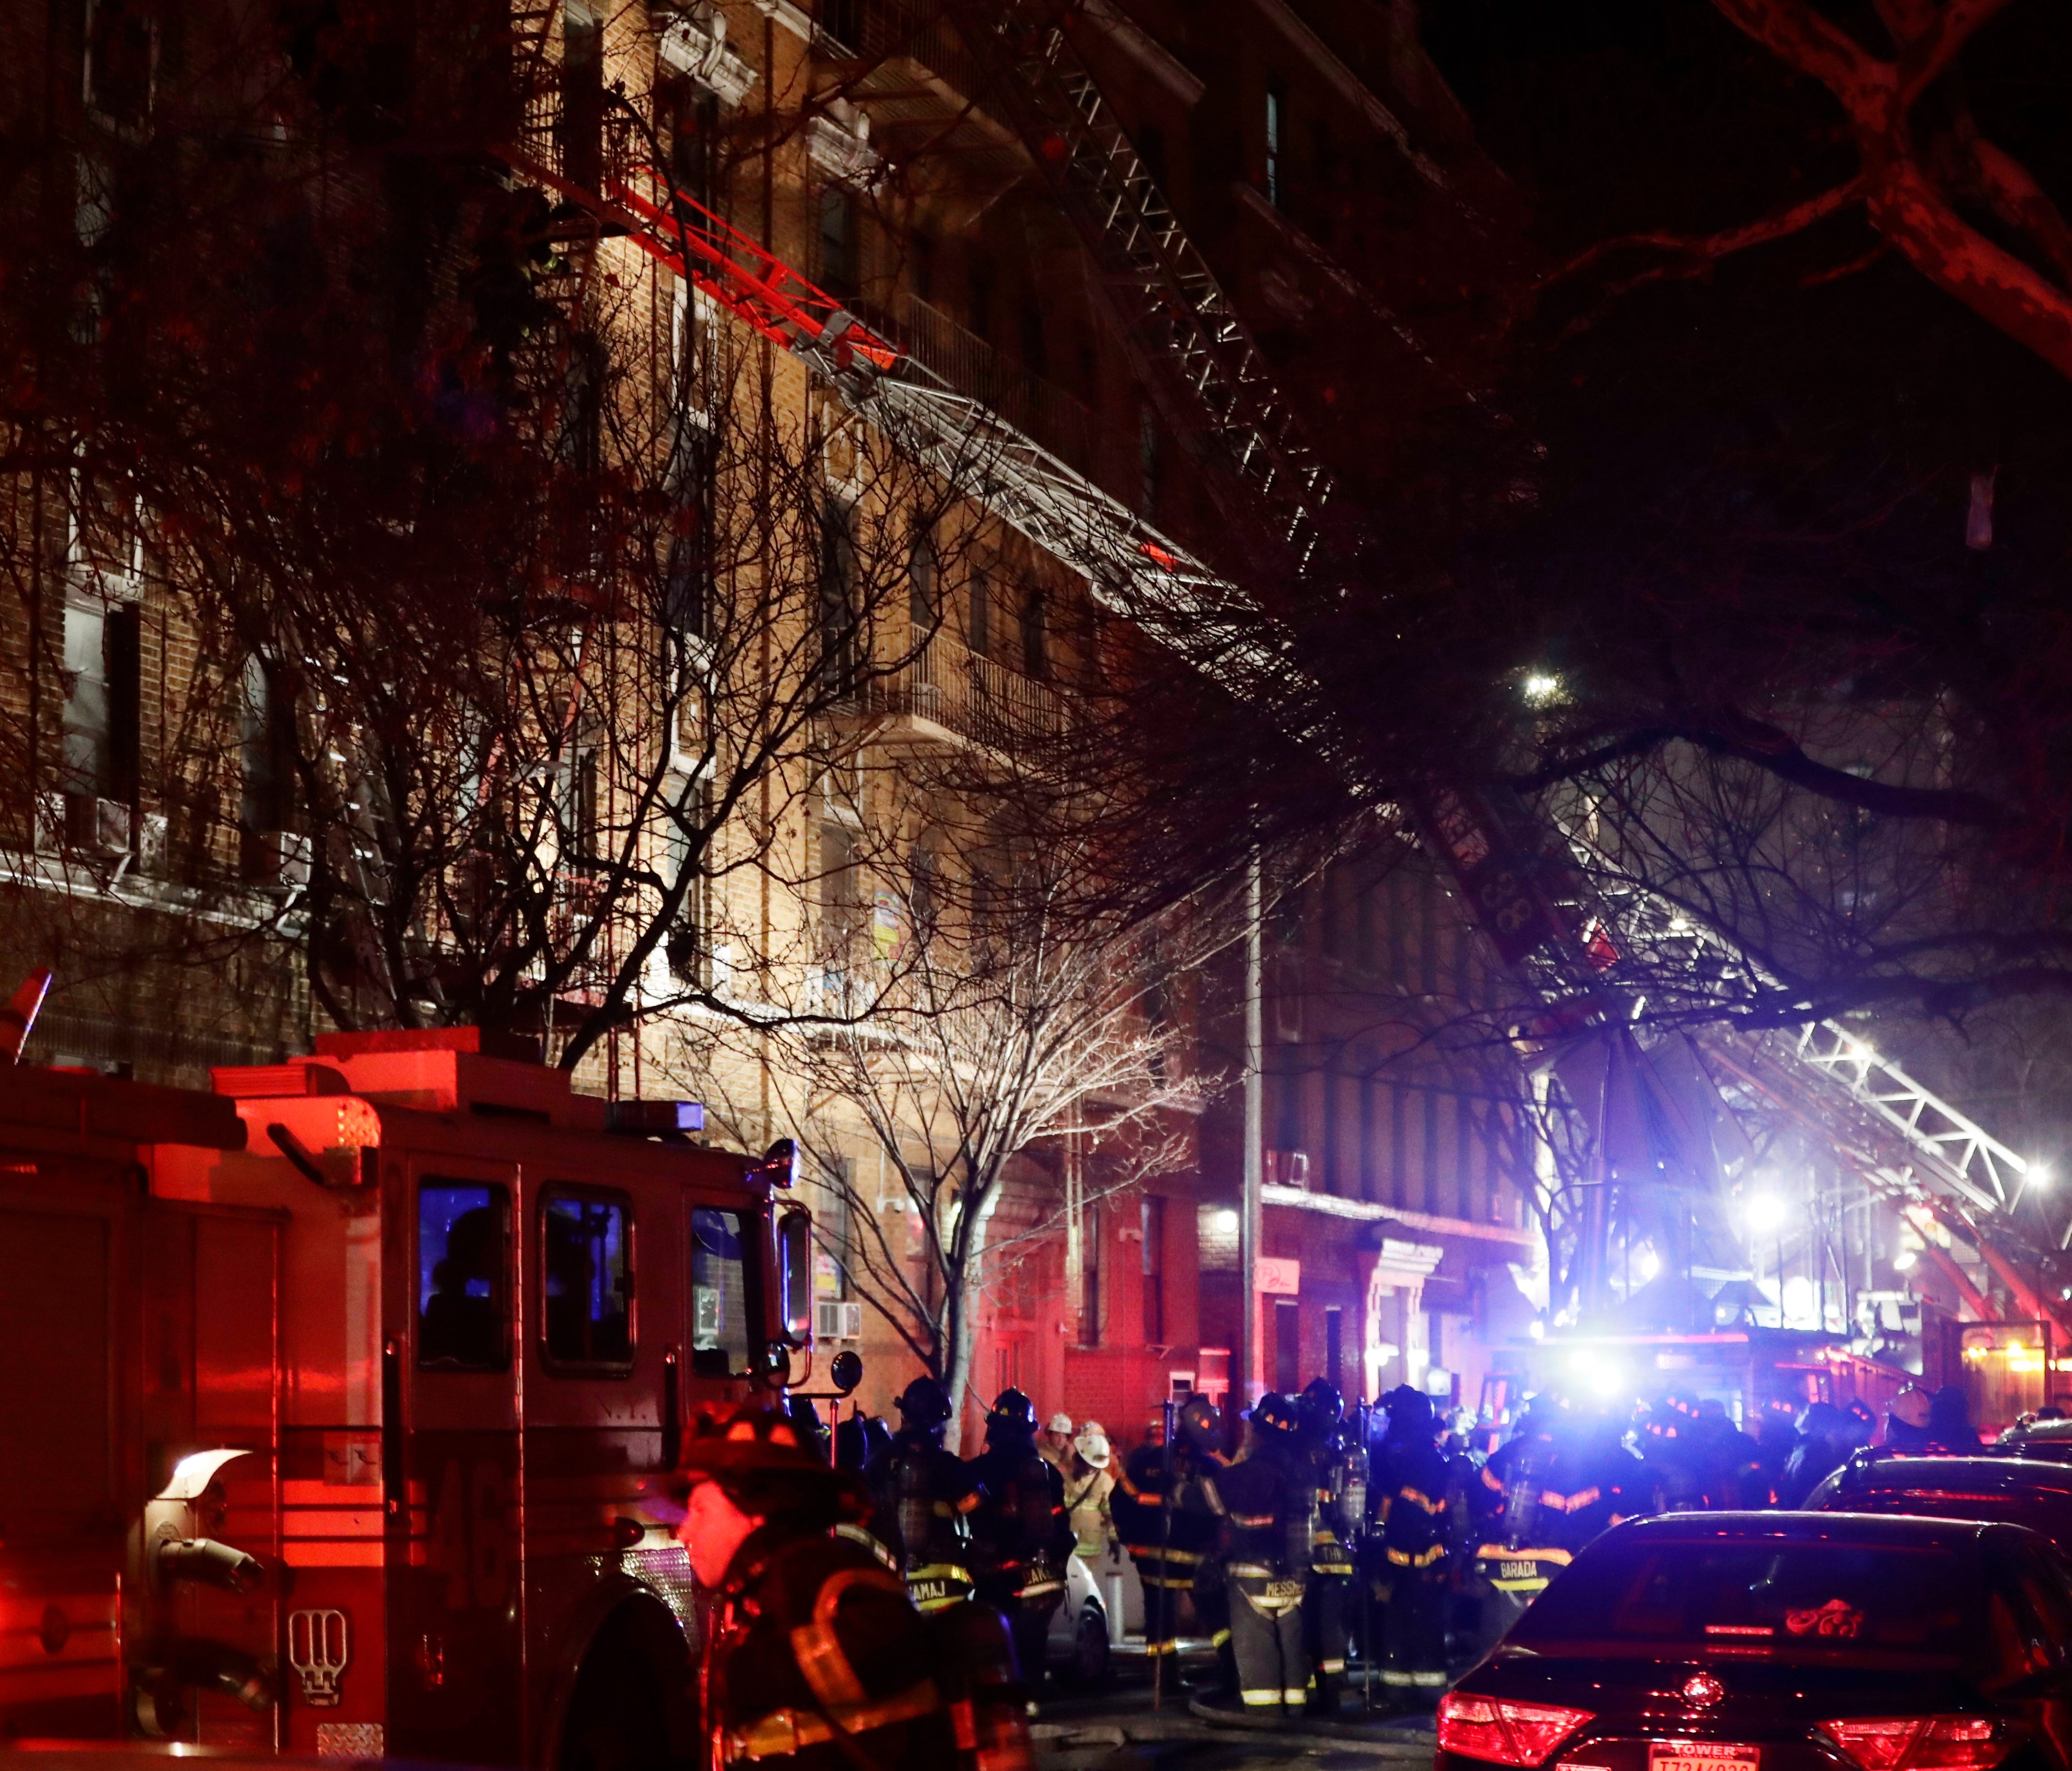 Firefighters respond to a building fire Thursday, Dec. 28, 2017, in the Bronx borough of New York. The Fire Department of New York says a blaze raging in the Bronx apartment building has killed at least six and seriously injured more than a dozen.